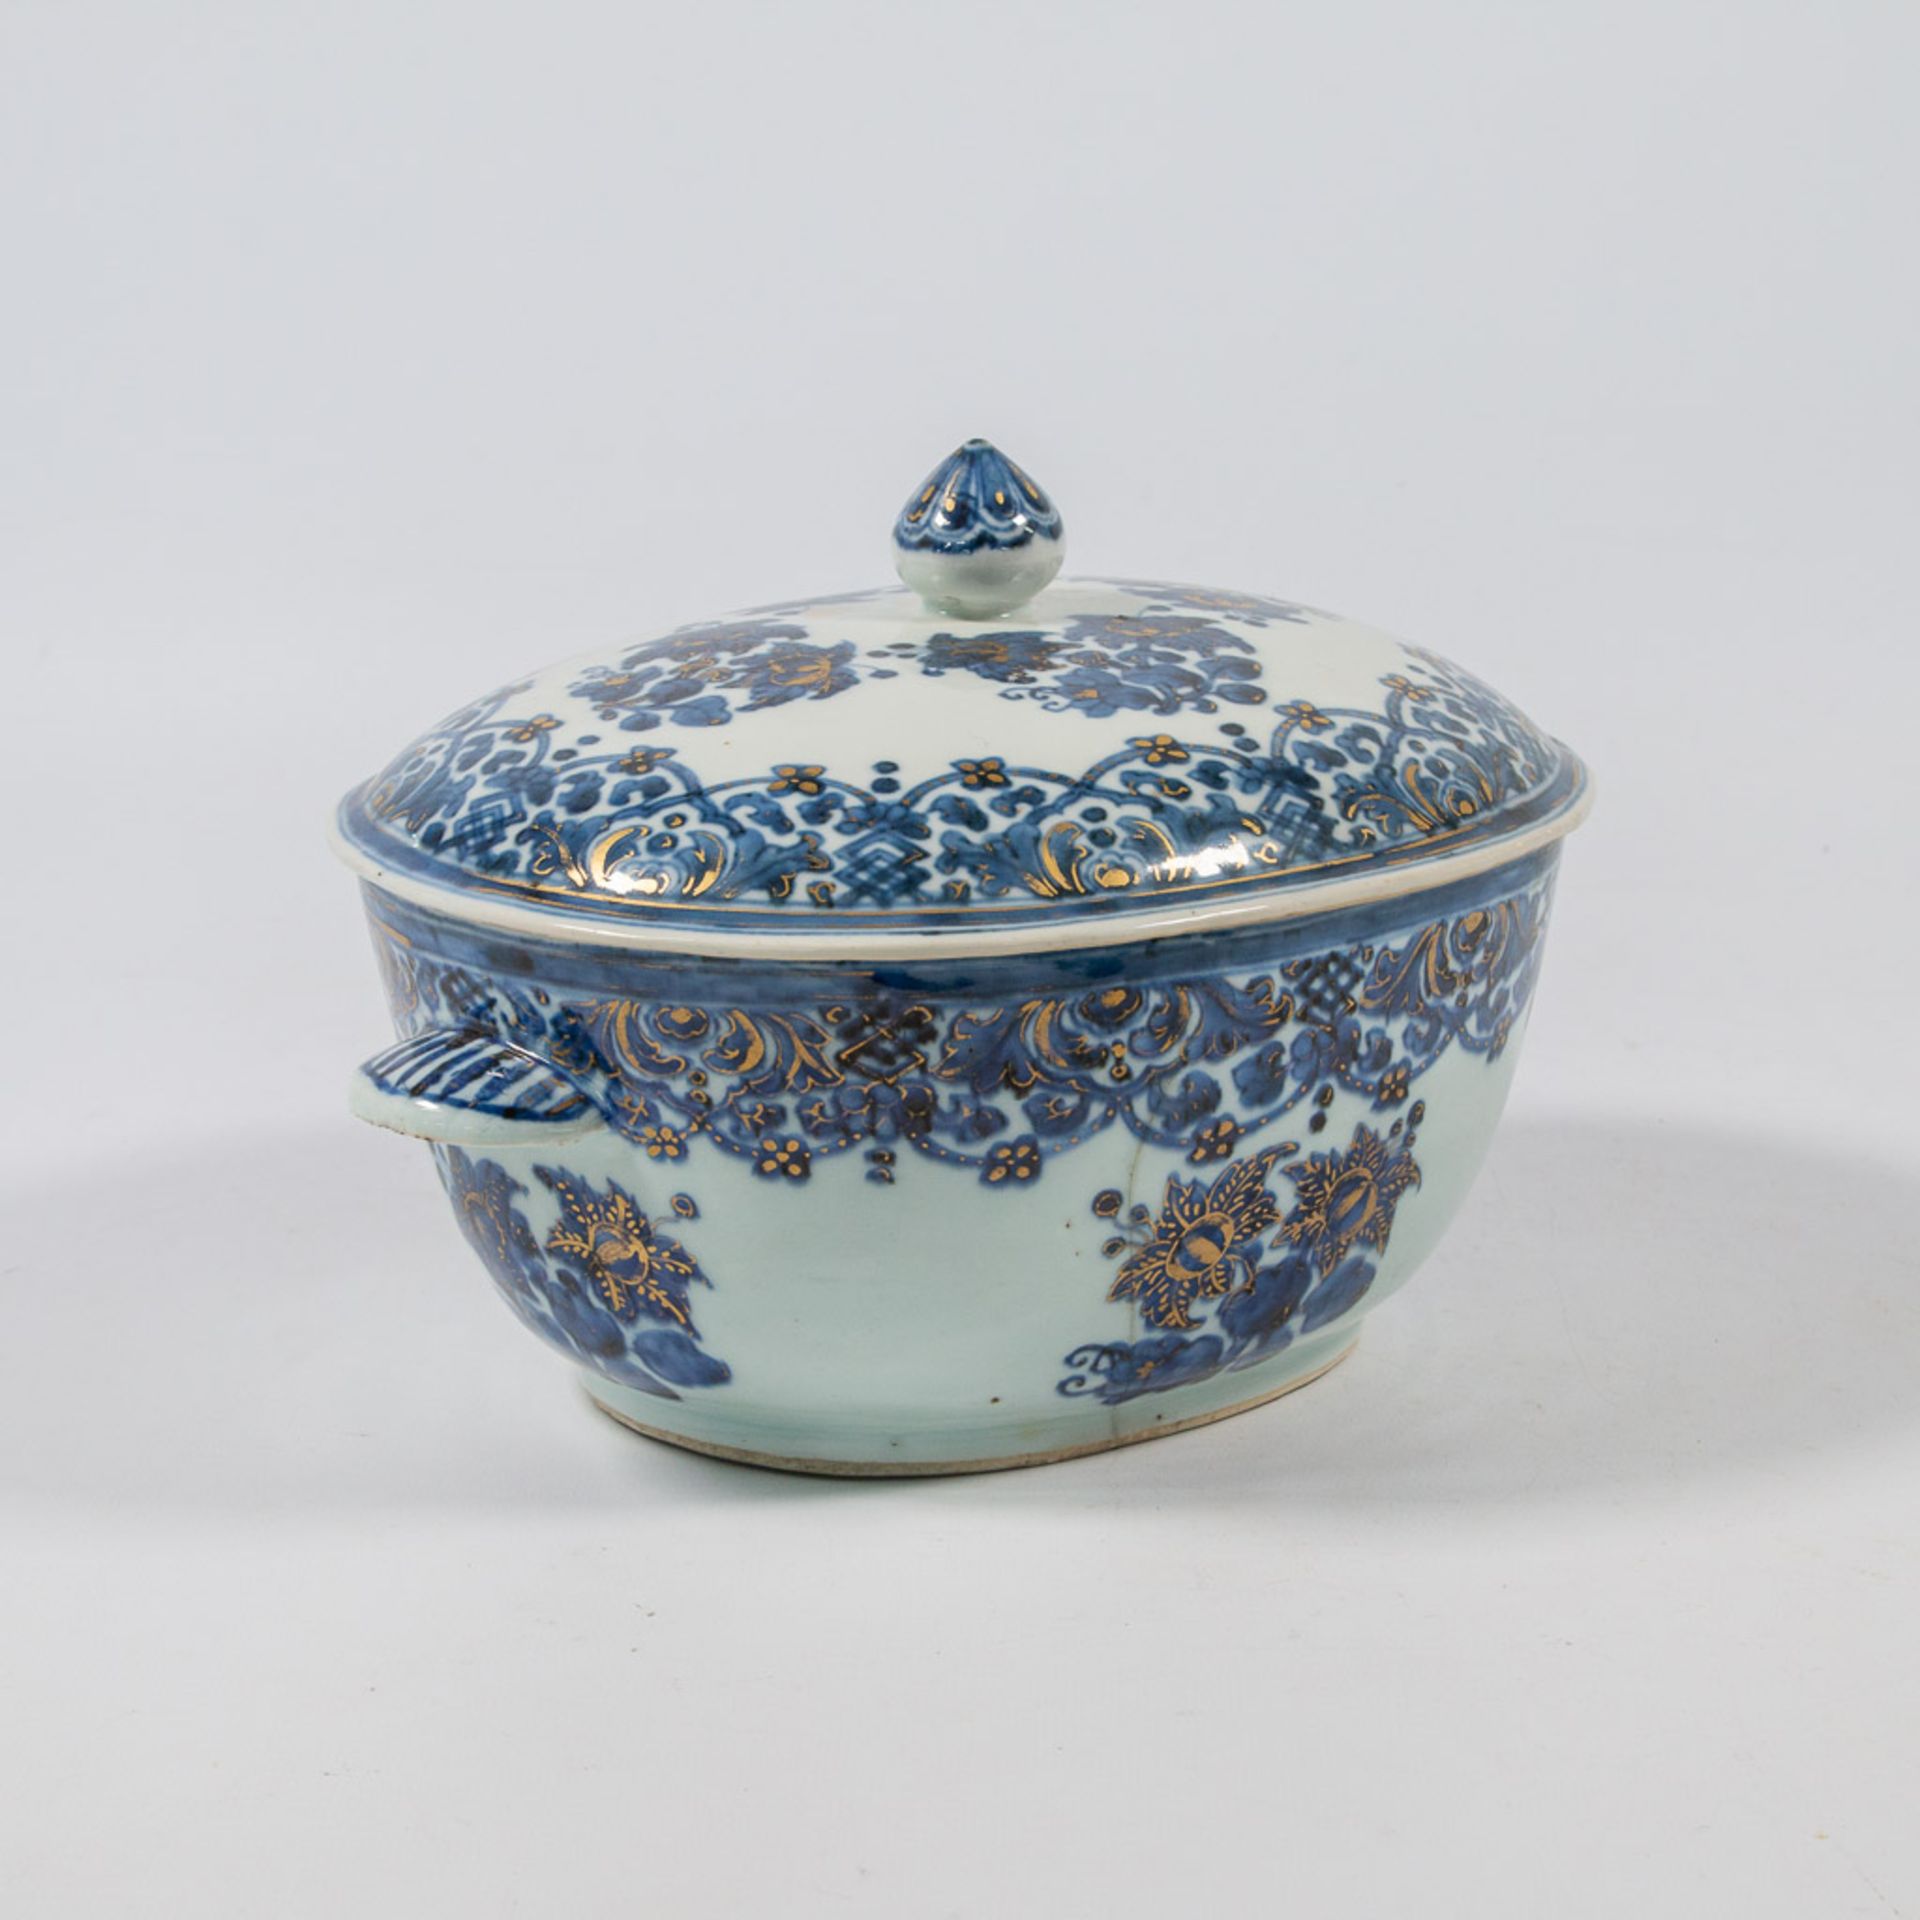 A small tureen with lid, Chinese export porcelain with underglaze blue, white and overglaze gold flo - Image 10 of 24